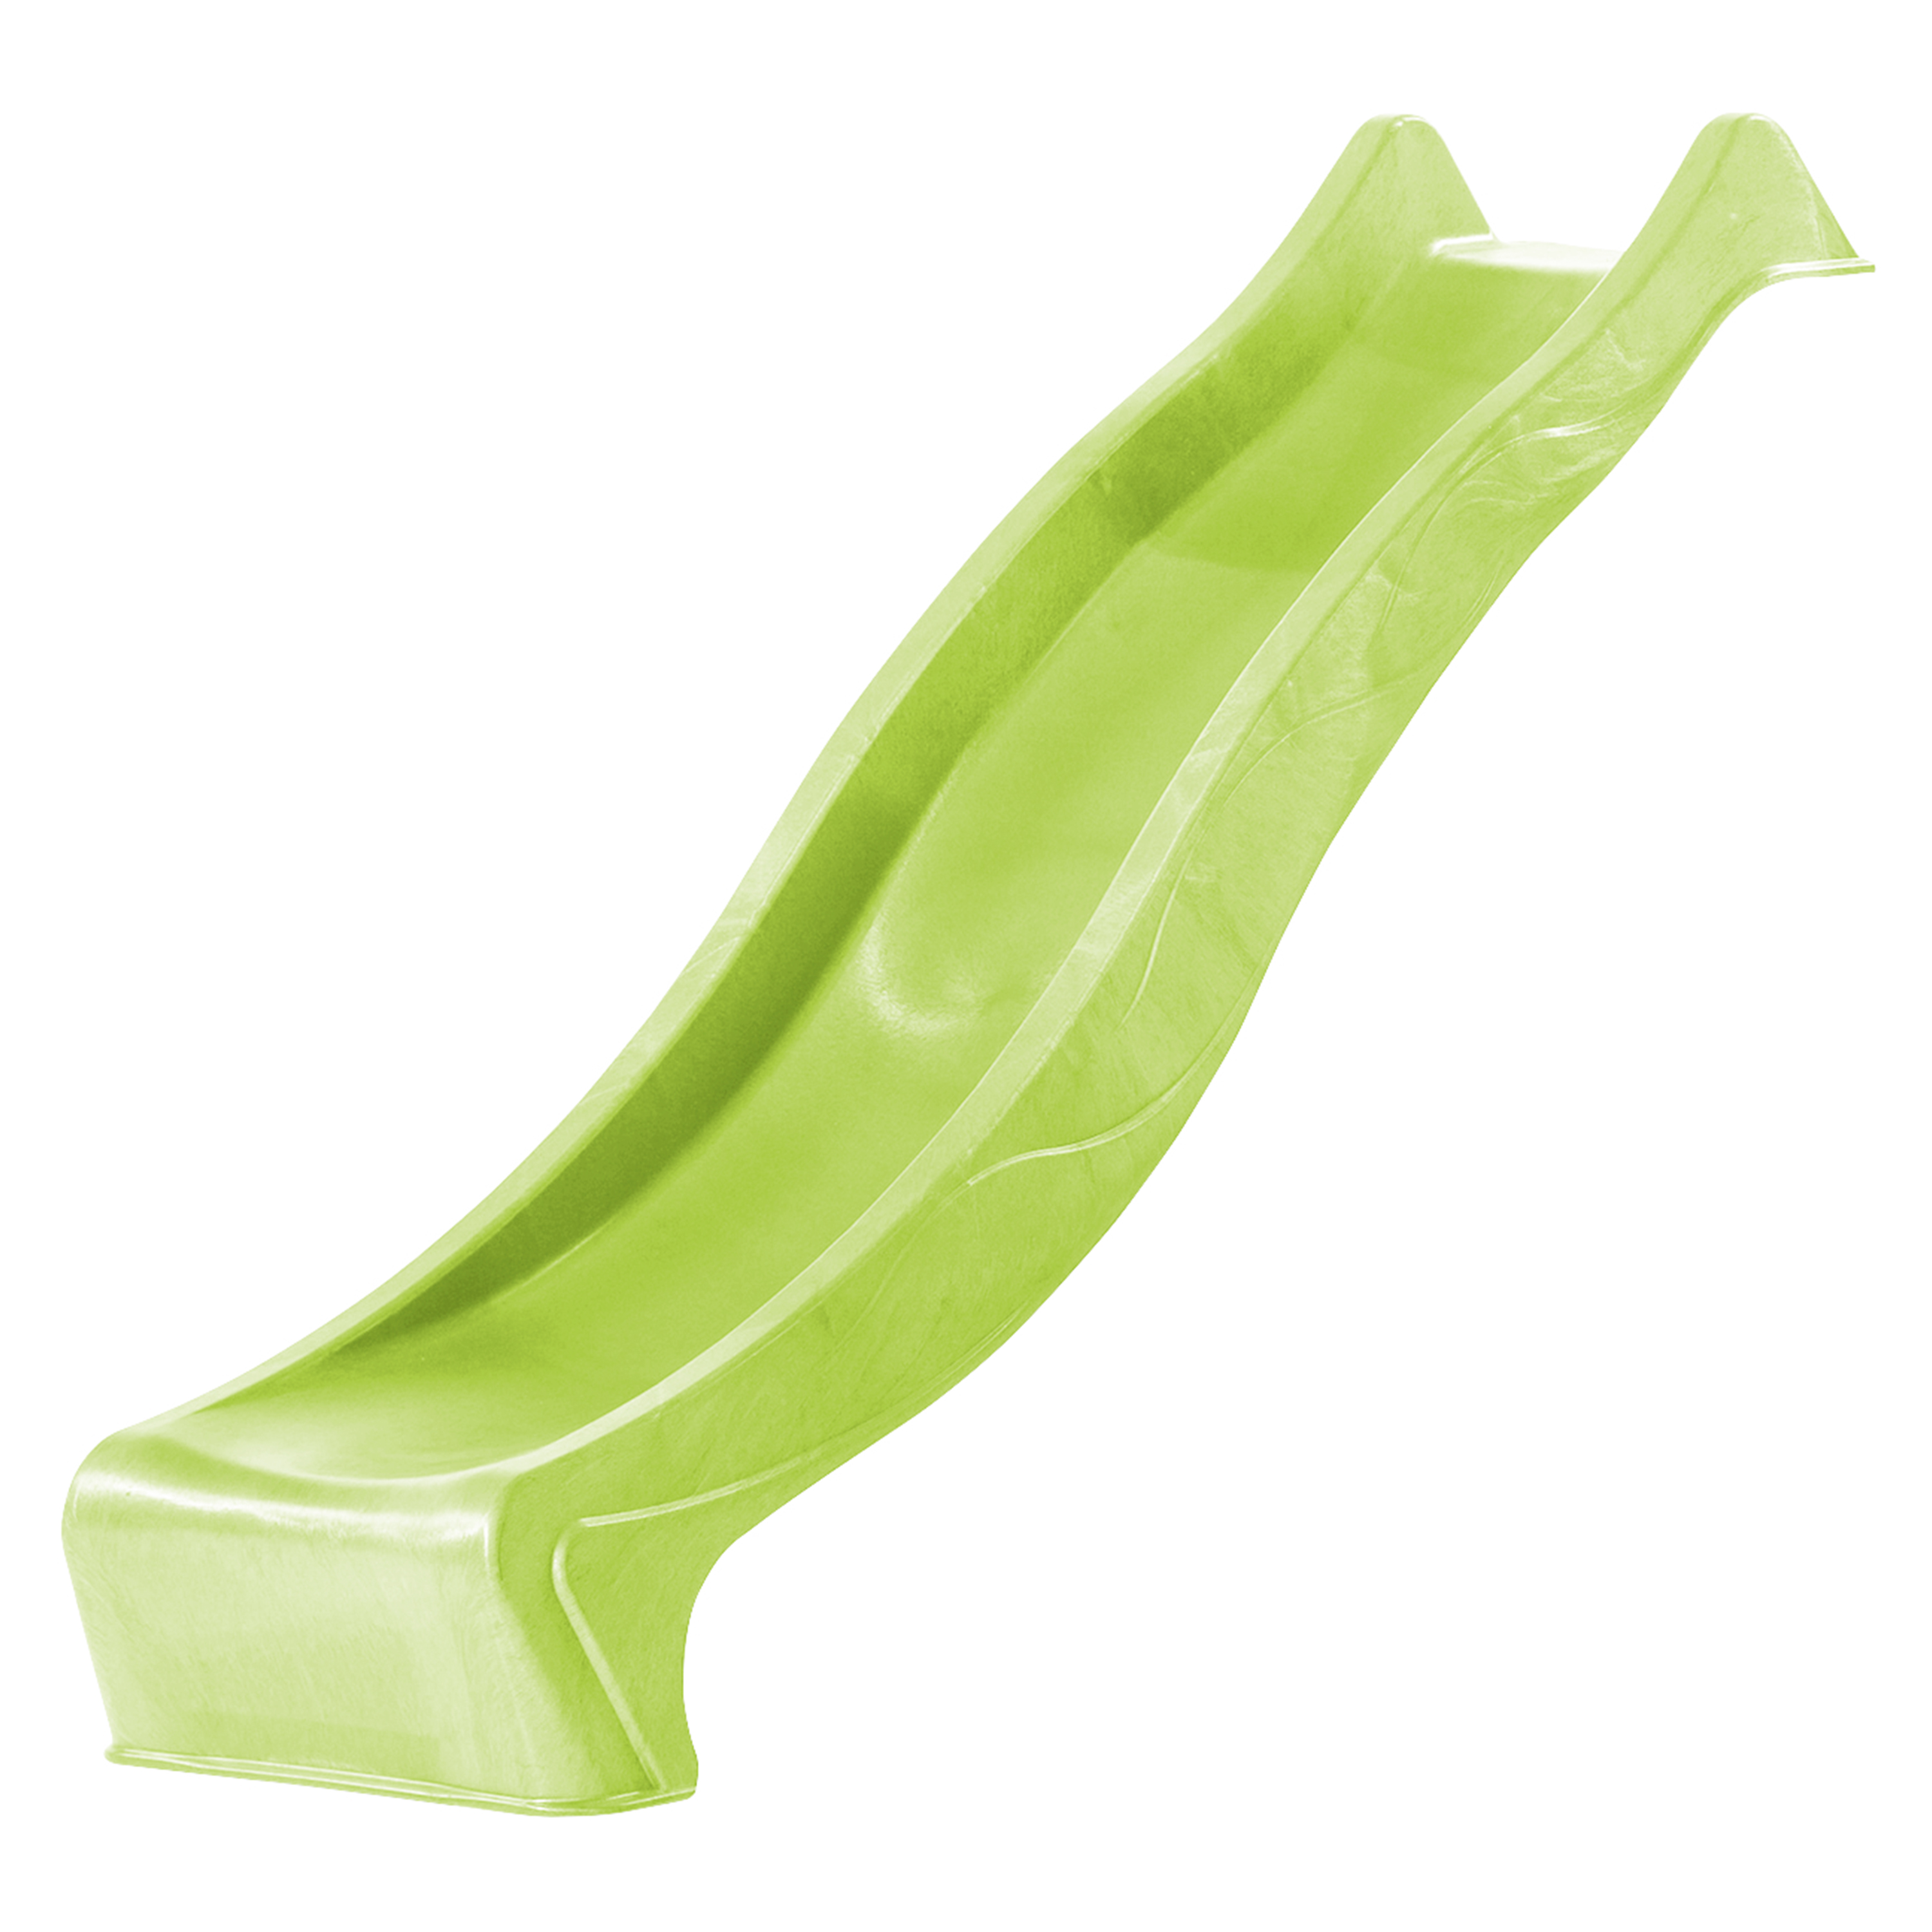 Sky230 Slide with water connection Lime Green - 228 cm